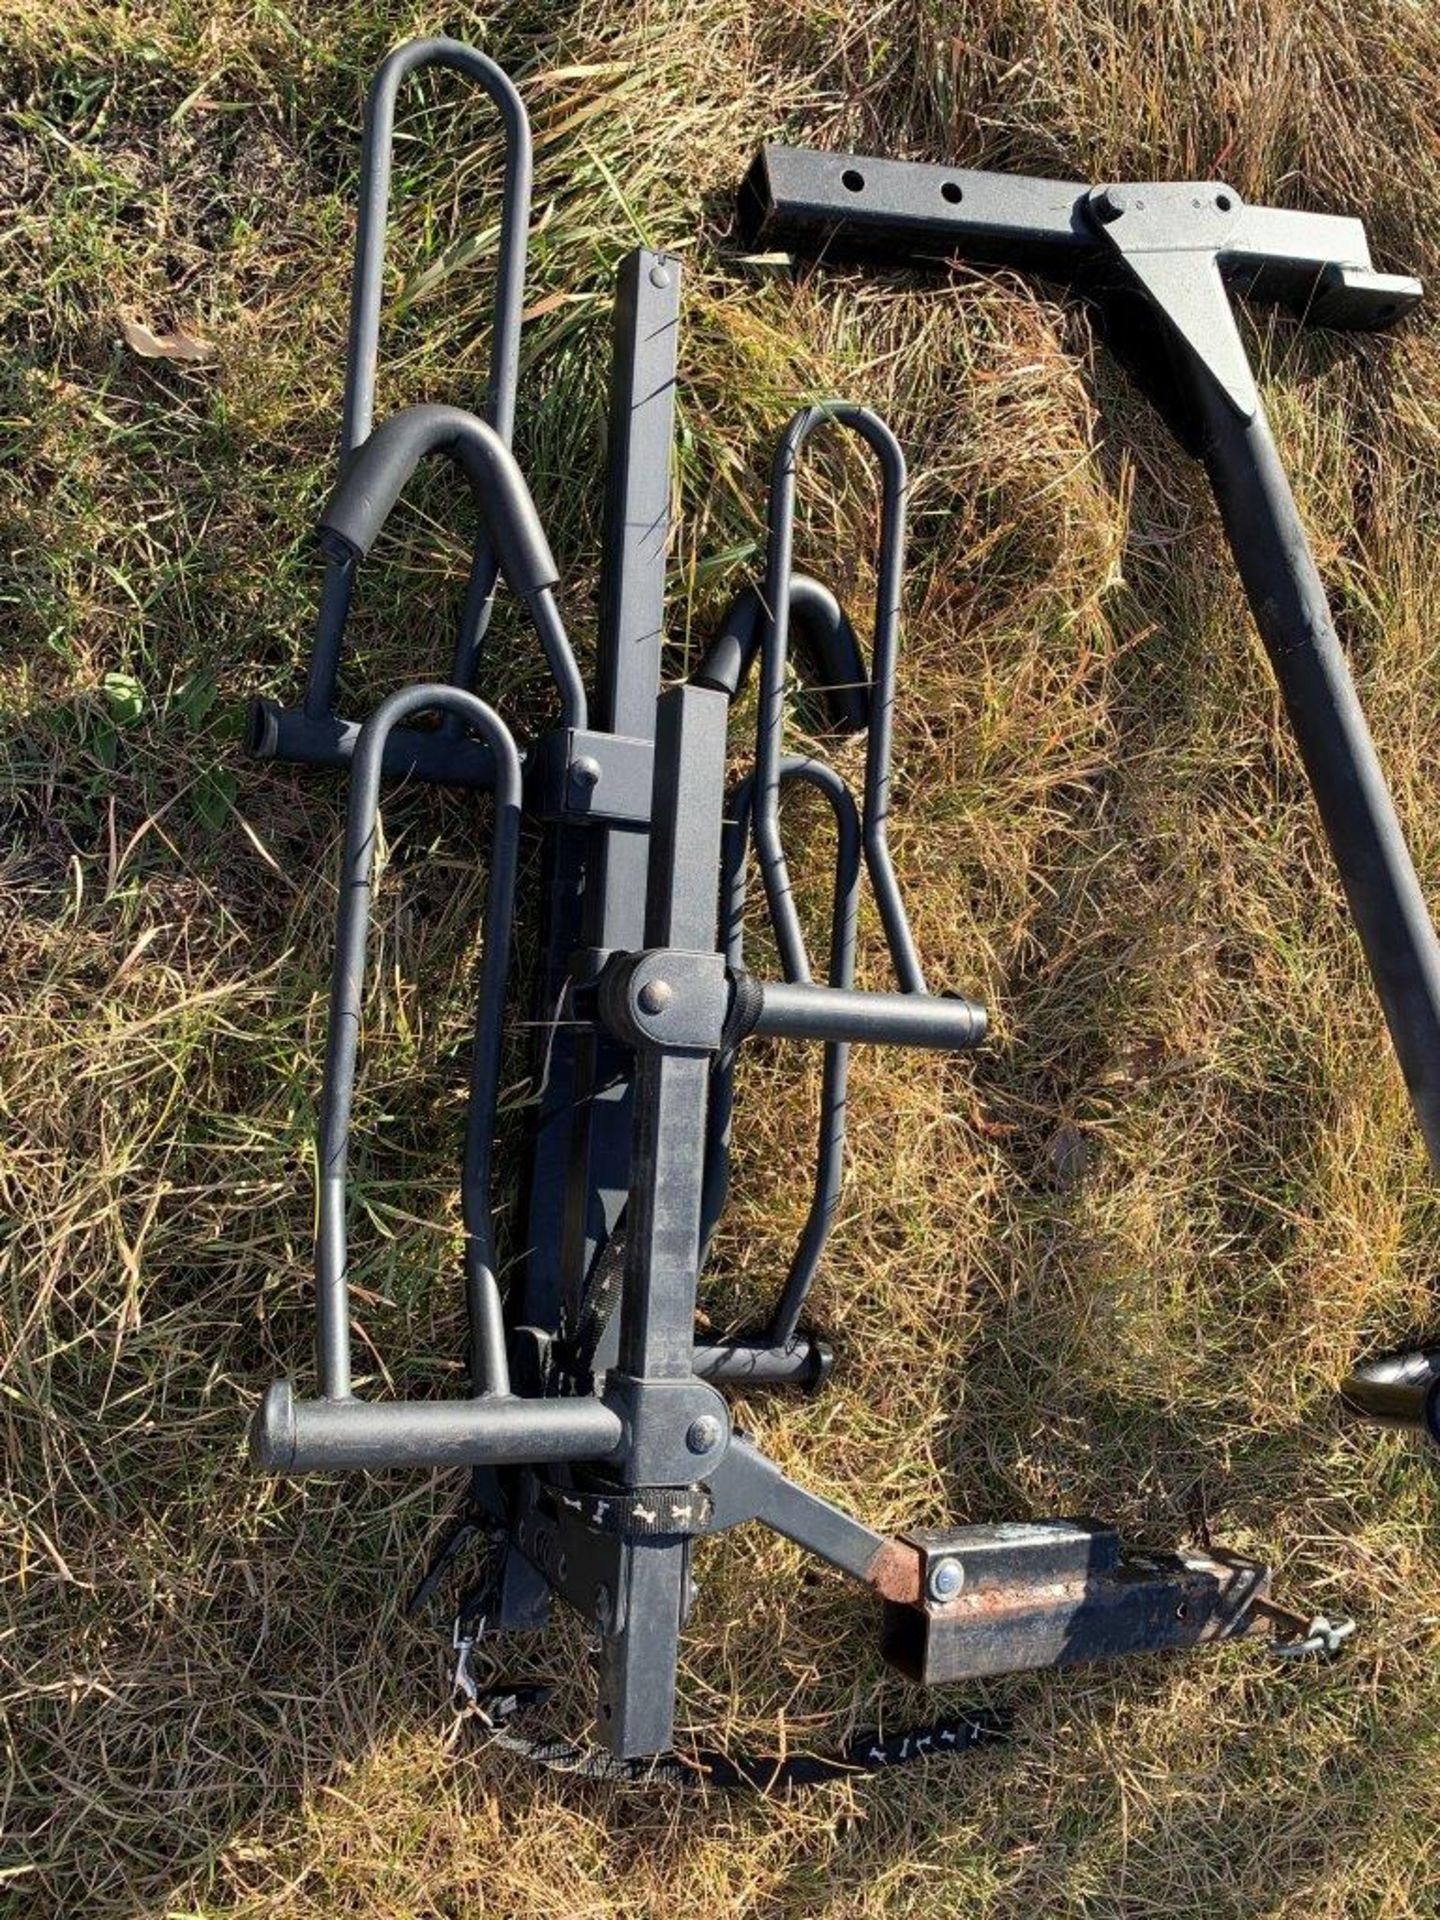 HITCH MOUNT 4-BICYCLE CARRIER AND HITCH MOUNT 2-BICYCLE CARRIER - Image 2 of 4